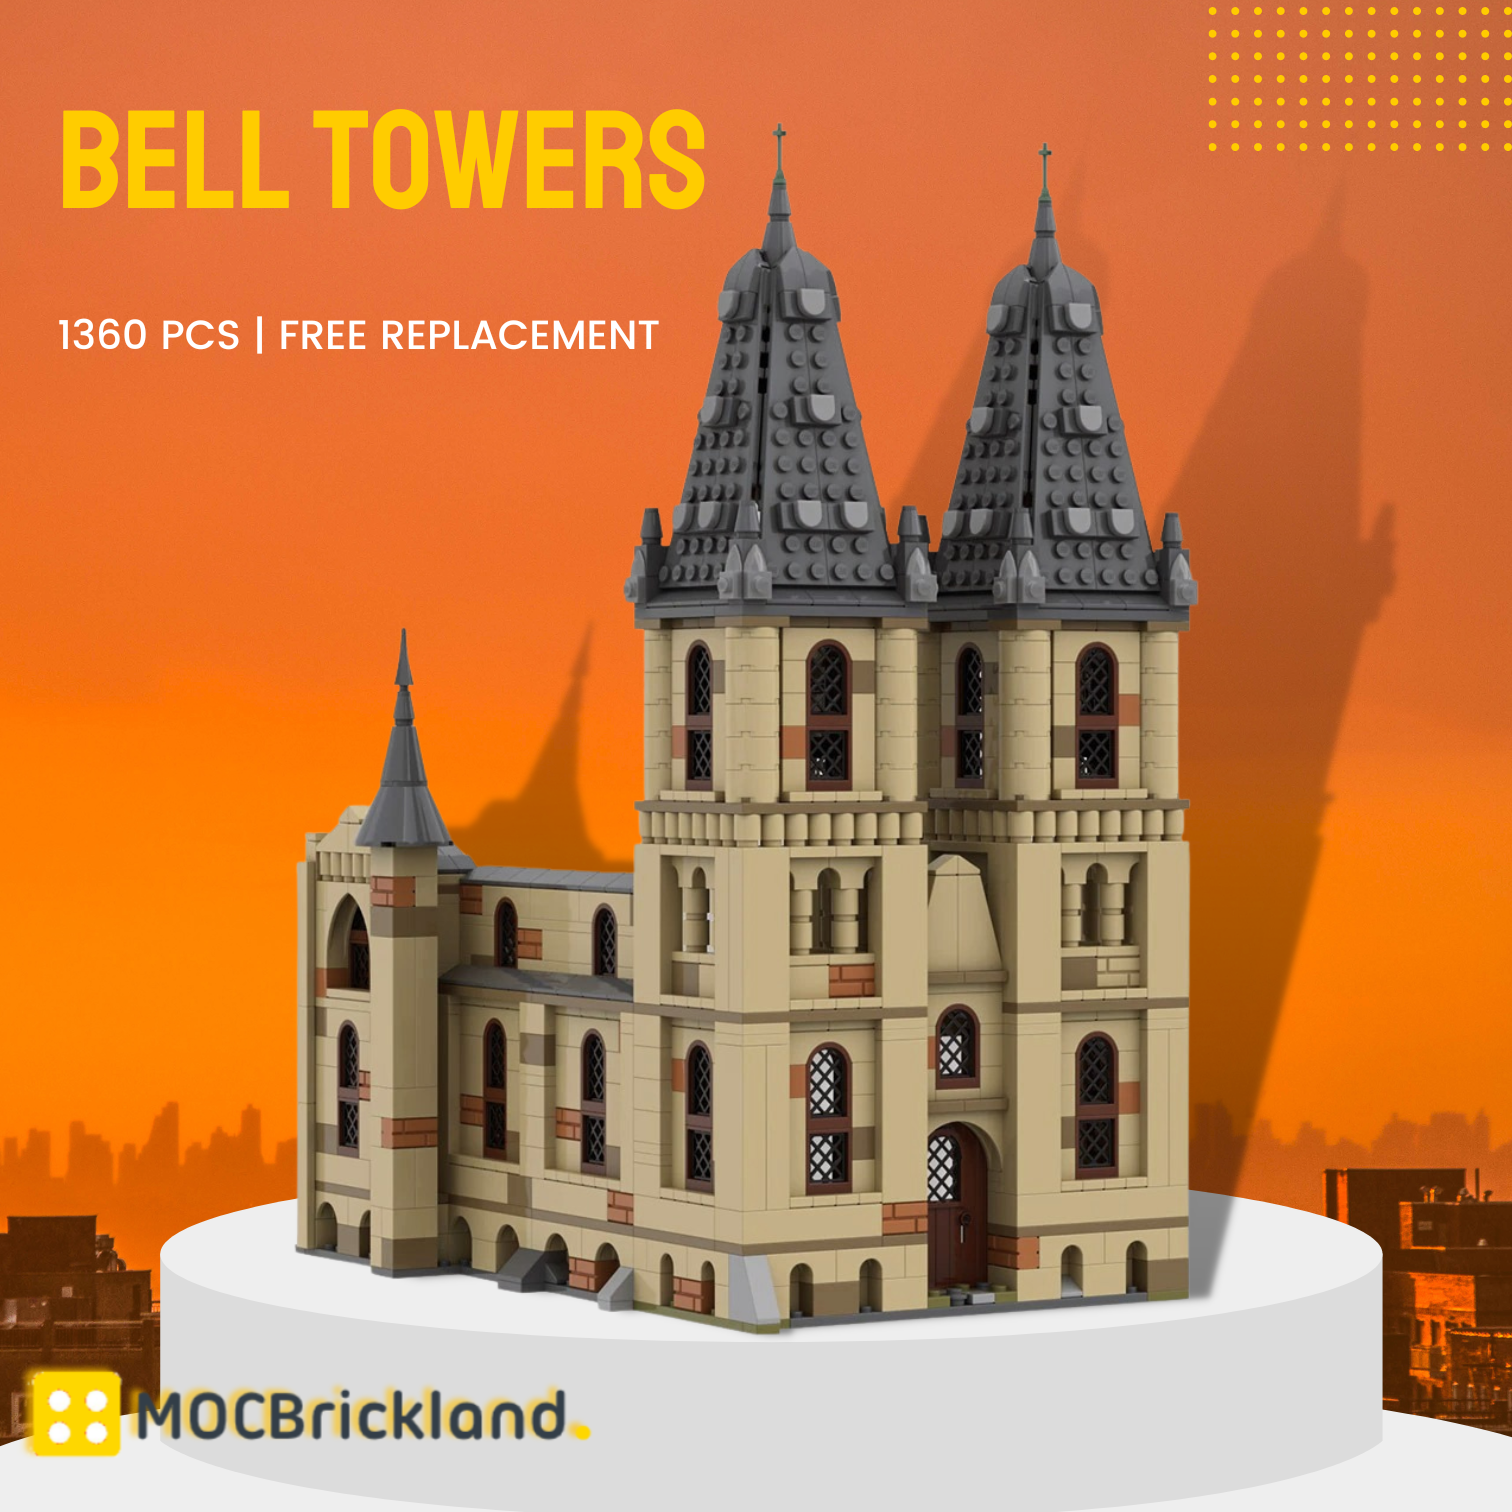 Movie MOC-87567 Bell Towers MOCBRICKLAND